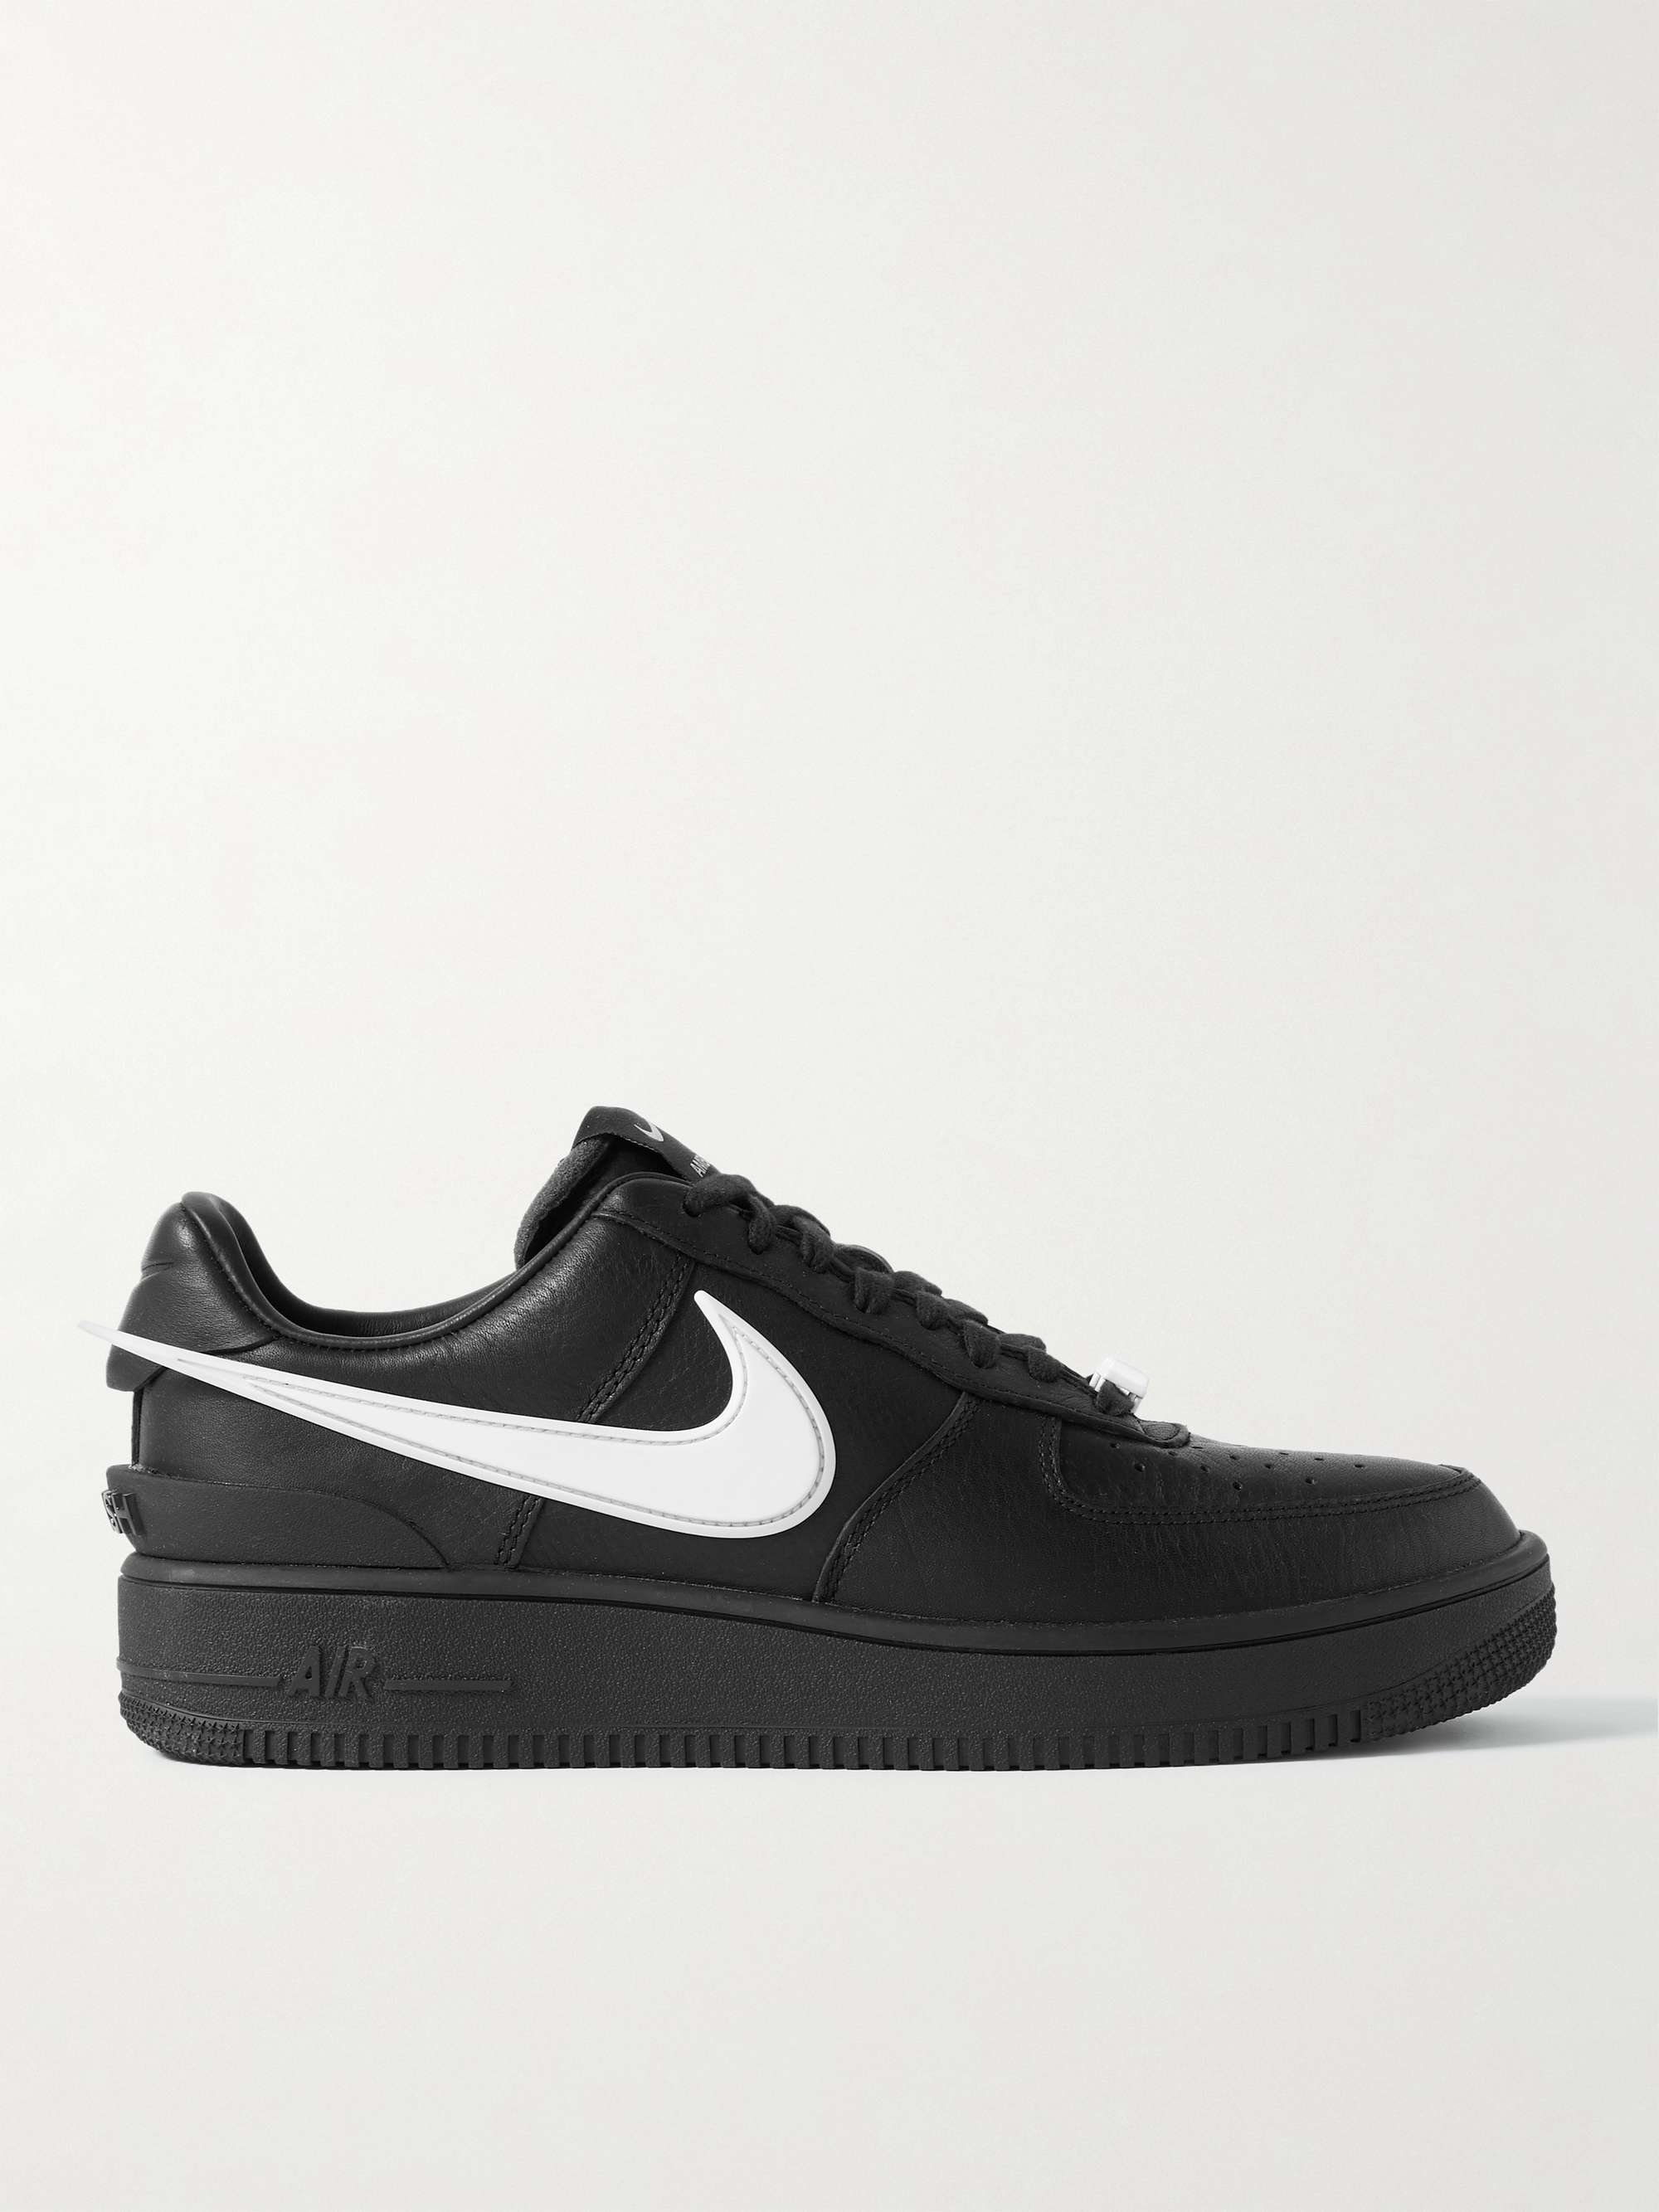 NIKE + AMBUSH Air Force 1 Rubber-Trimmed Leather Sneakers | MR PORTER